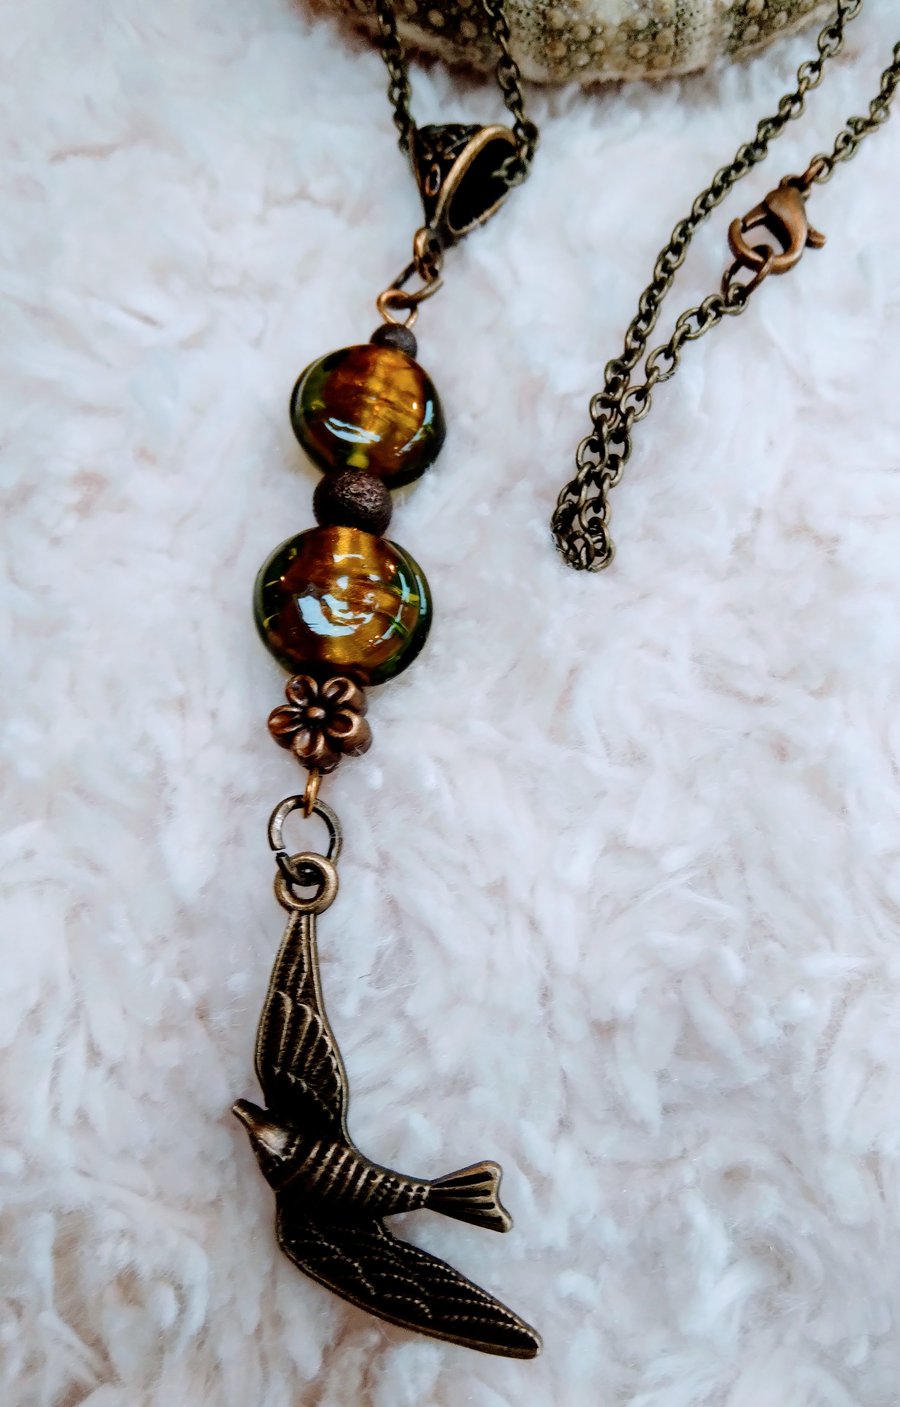 Hand-made foiled glass and bronze beaded SWIFT charm pendant necklace